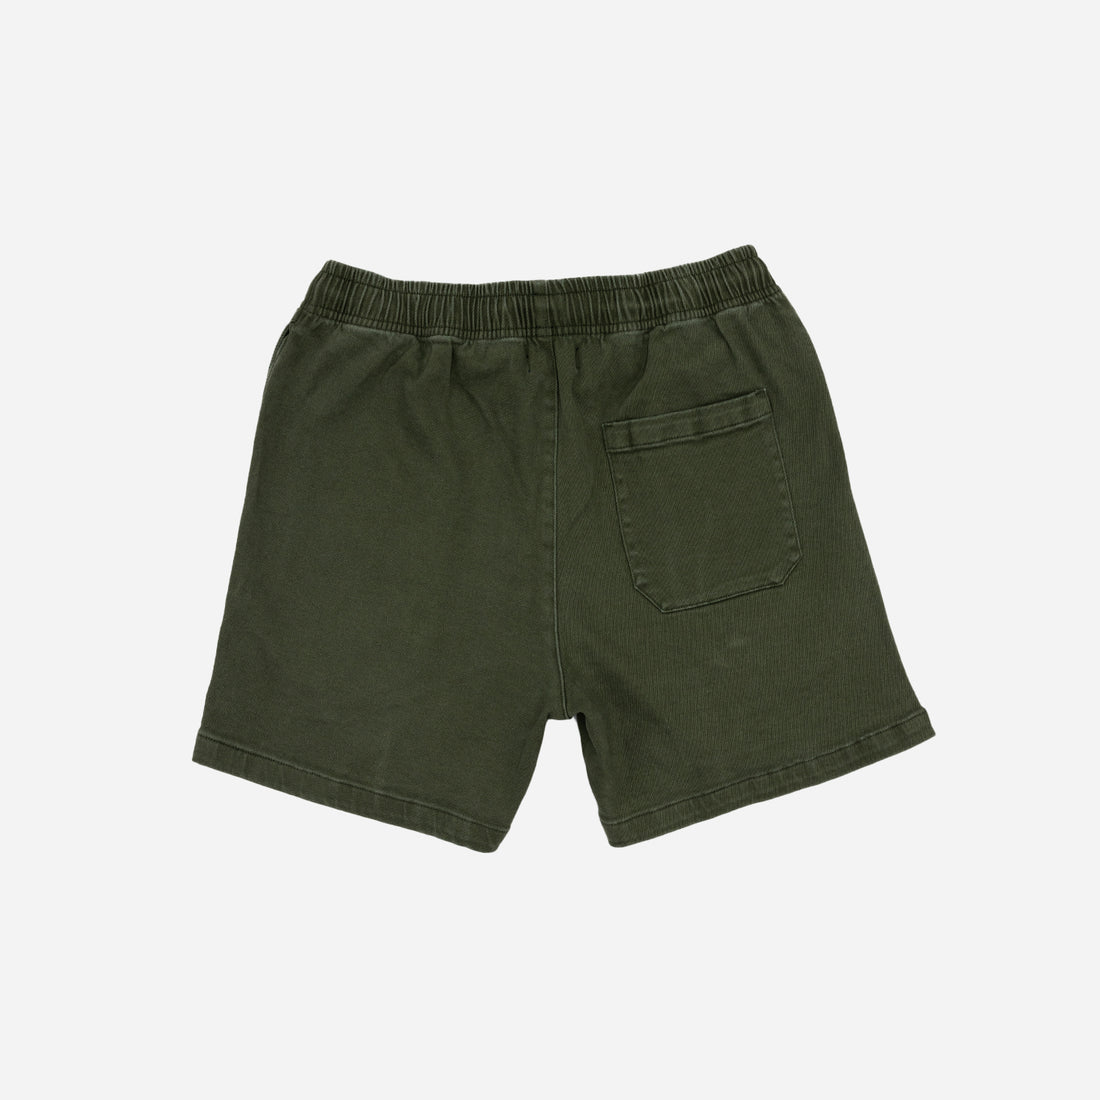 5" Washed Gym Shorts in Olive Green